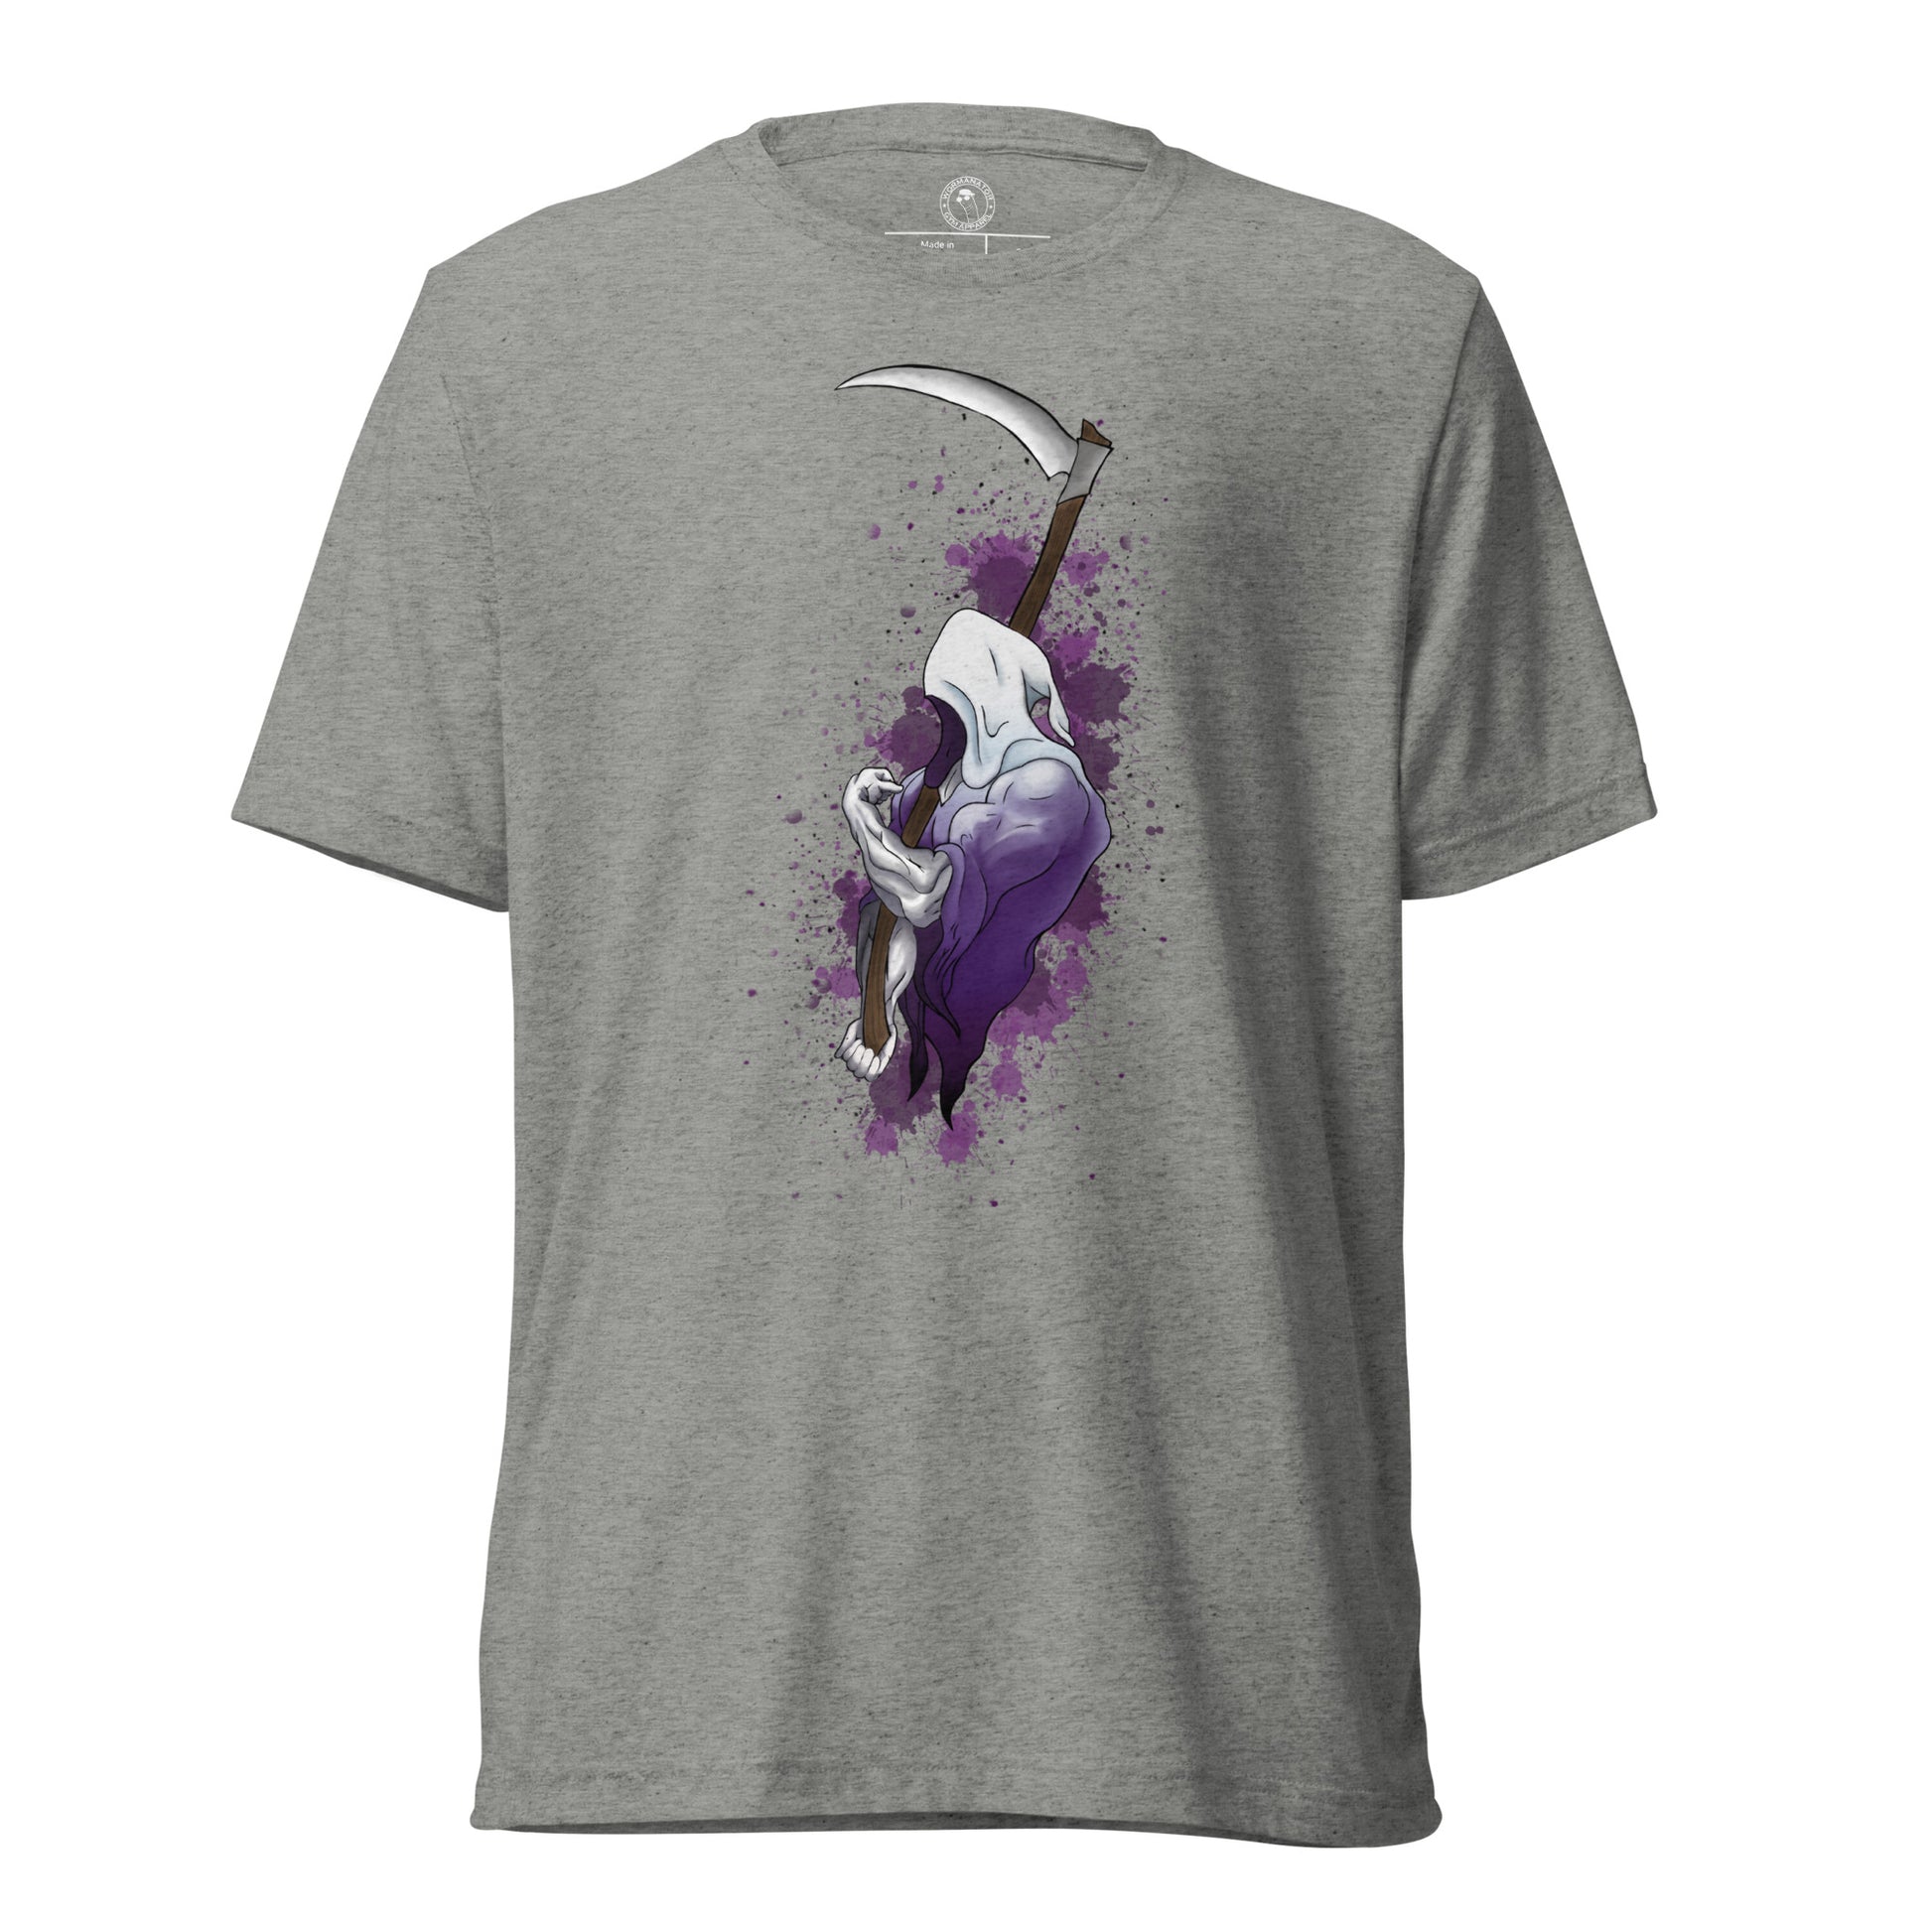 Grip Reaper Shirt in Athletic Grey Triblend